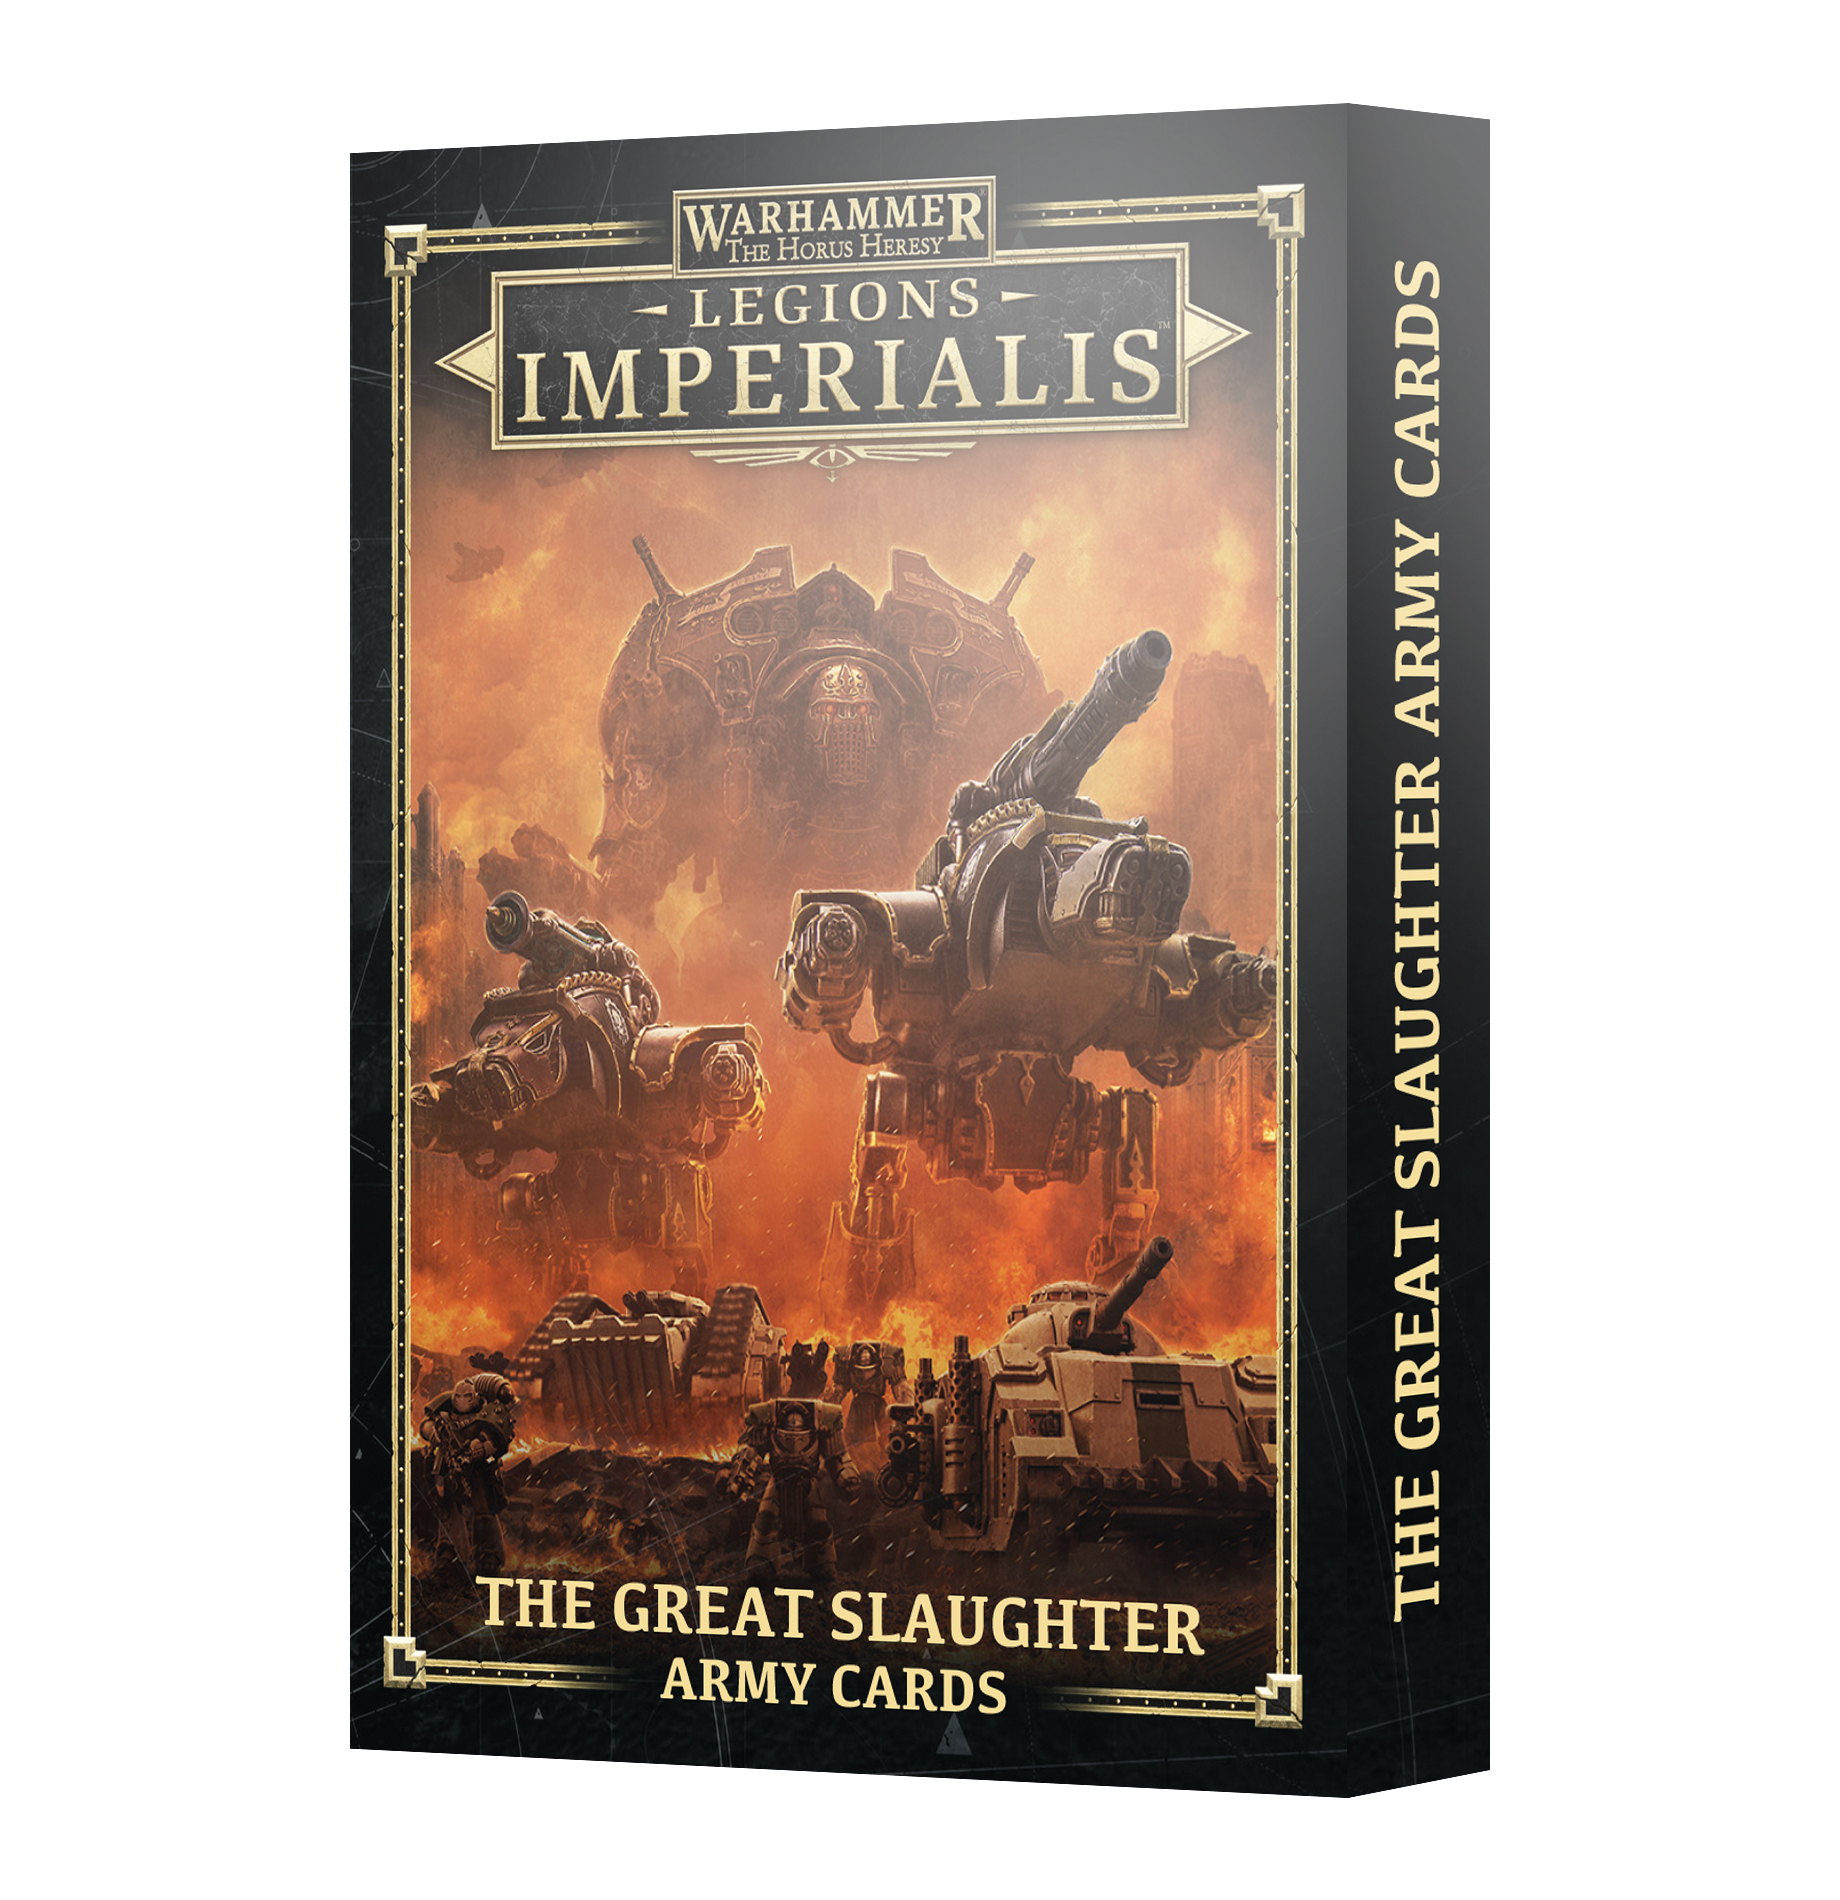 Warhammer: The Horus Heresy: Legions Imperialis: The Great Slaughter: Army Cards 